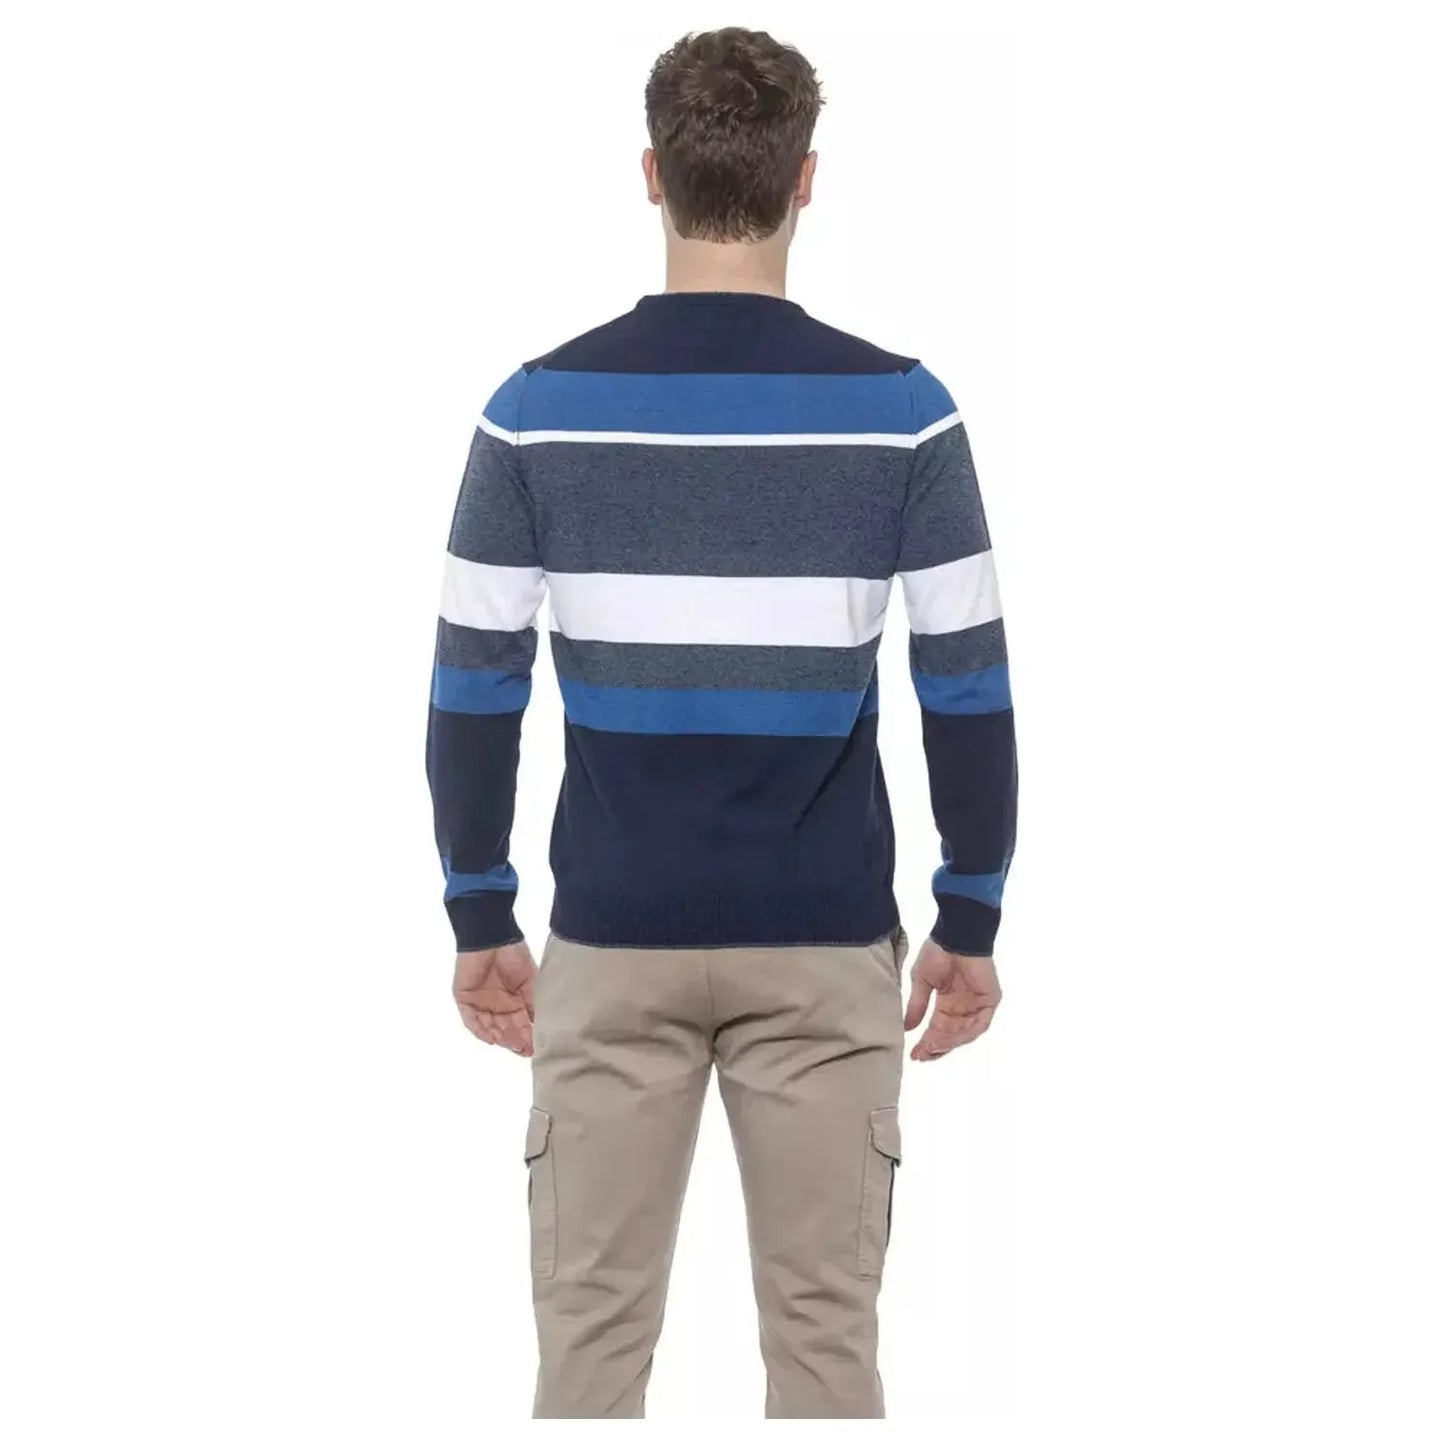 Conte of Florence Elegant Striped Crewneck Sweater in Blue prussianblue-sweater-4